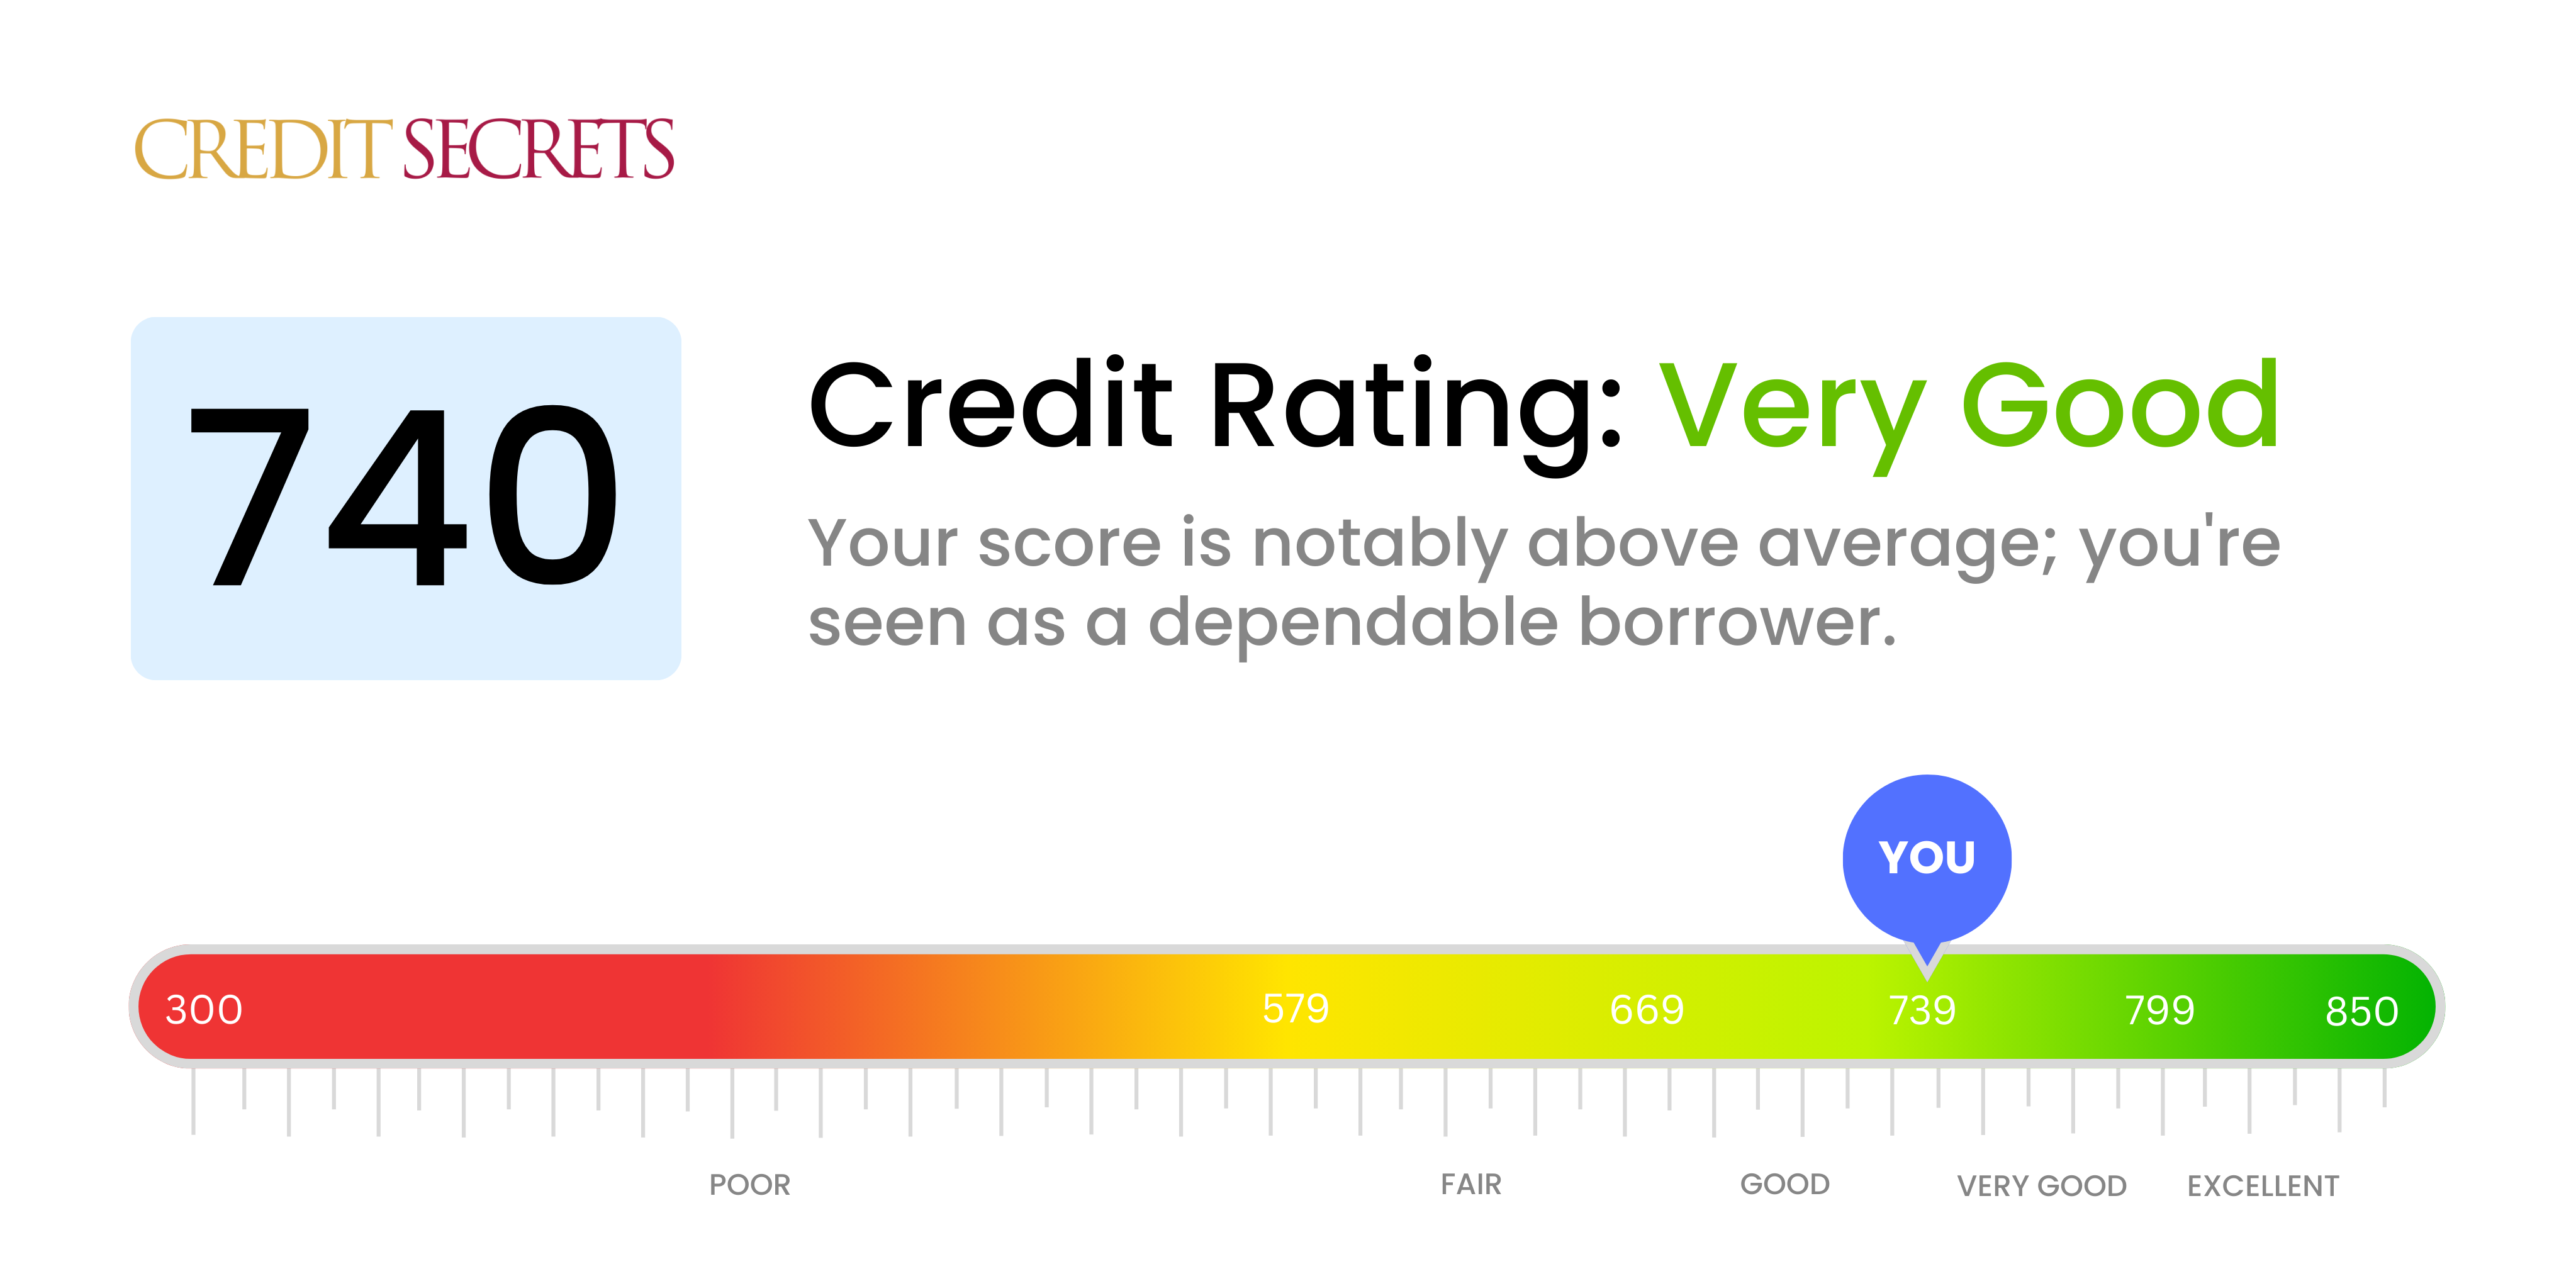 Is 740 a good credit score?